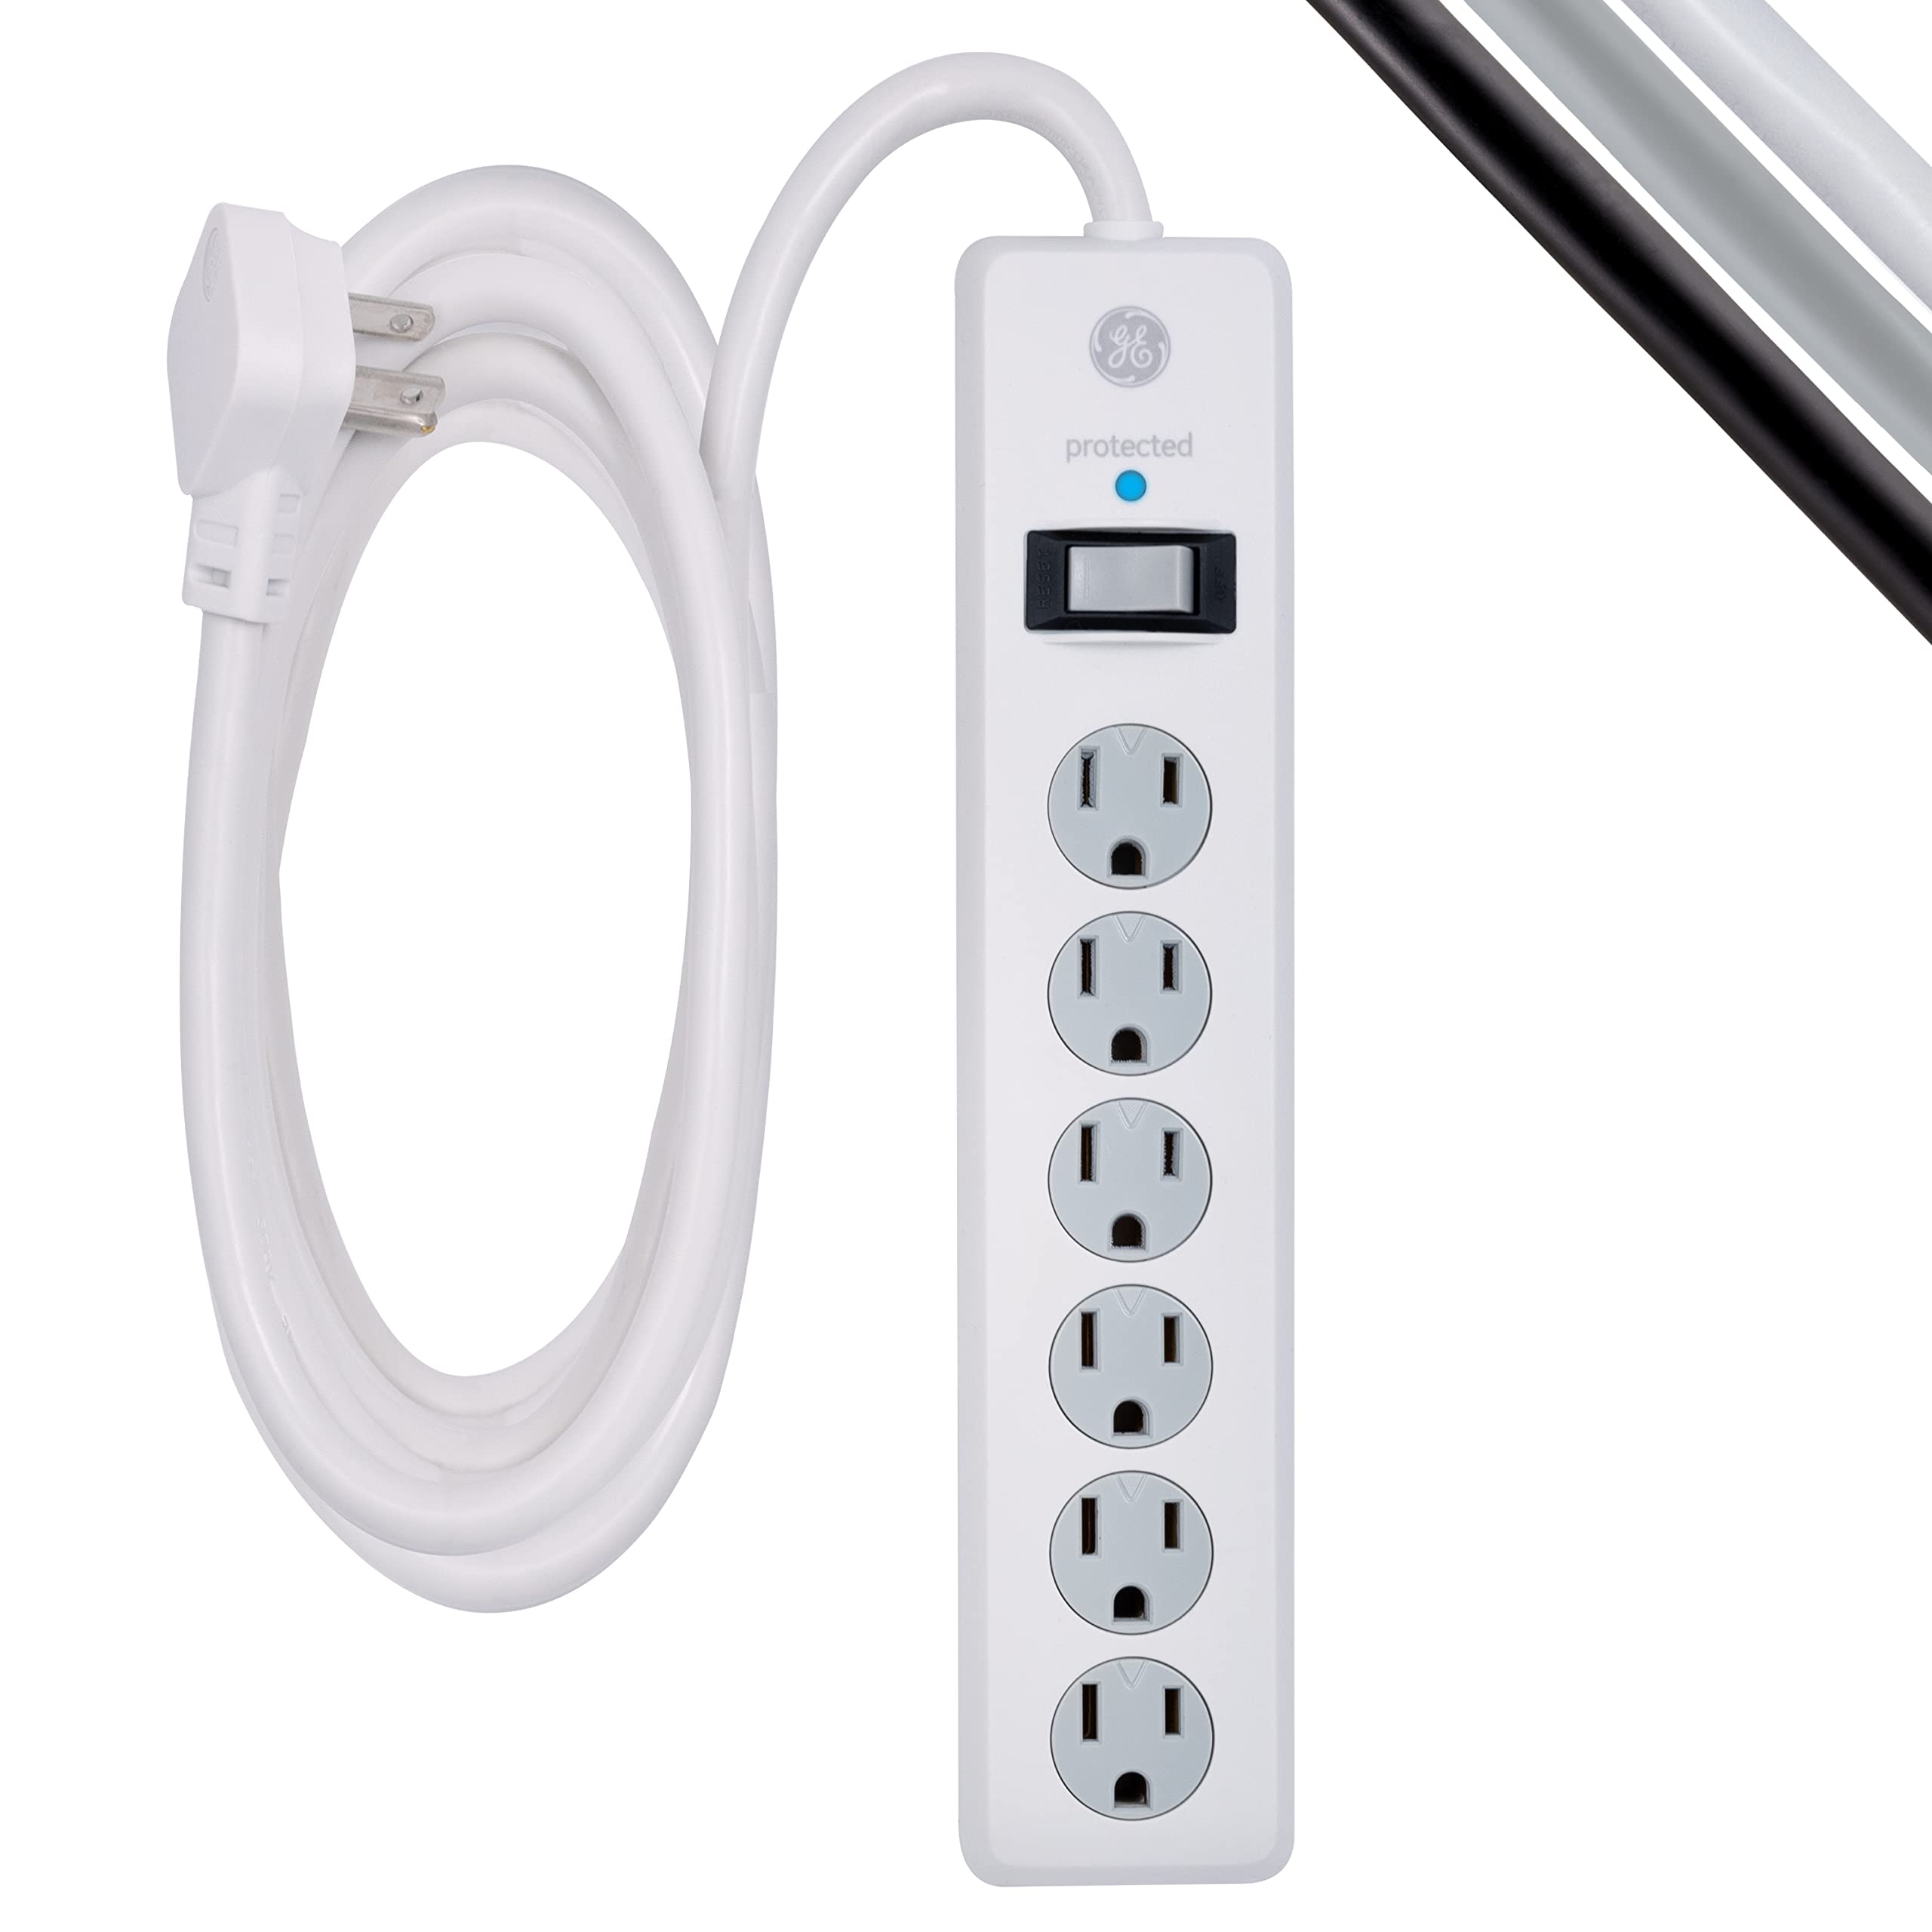 GE Pro 3-Outlet Power Strip with Surge Protection, 15 Ft, Black/Gray, 44237 & Protector, 10 Ft Extension Cord, Power Strip, 800 Joules, Flat Plug, White, 14092